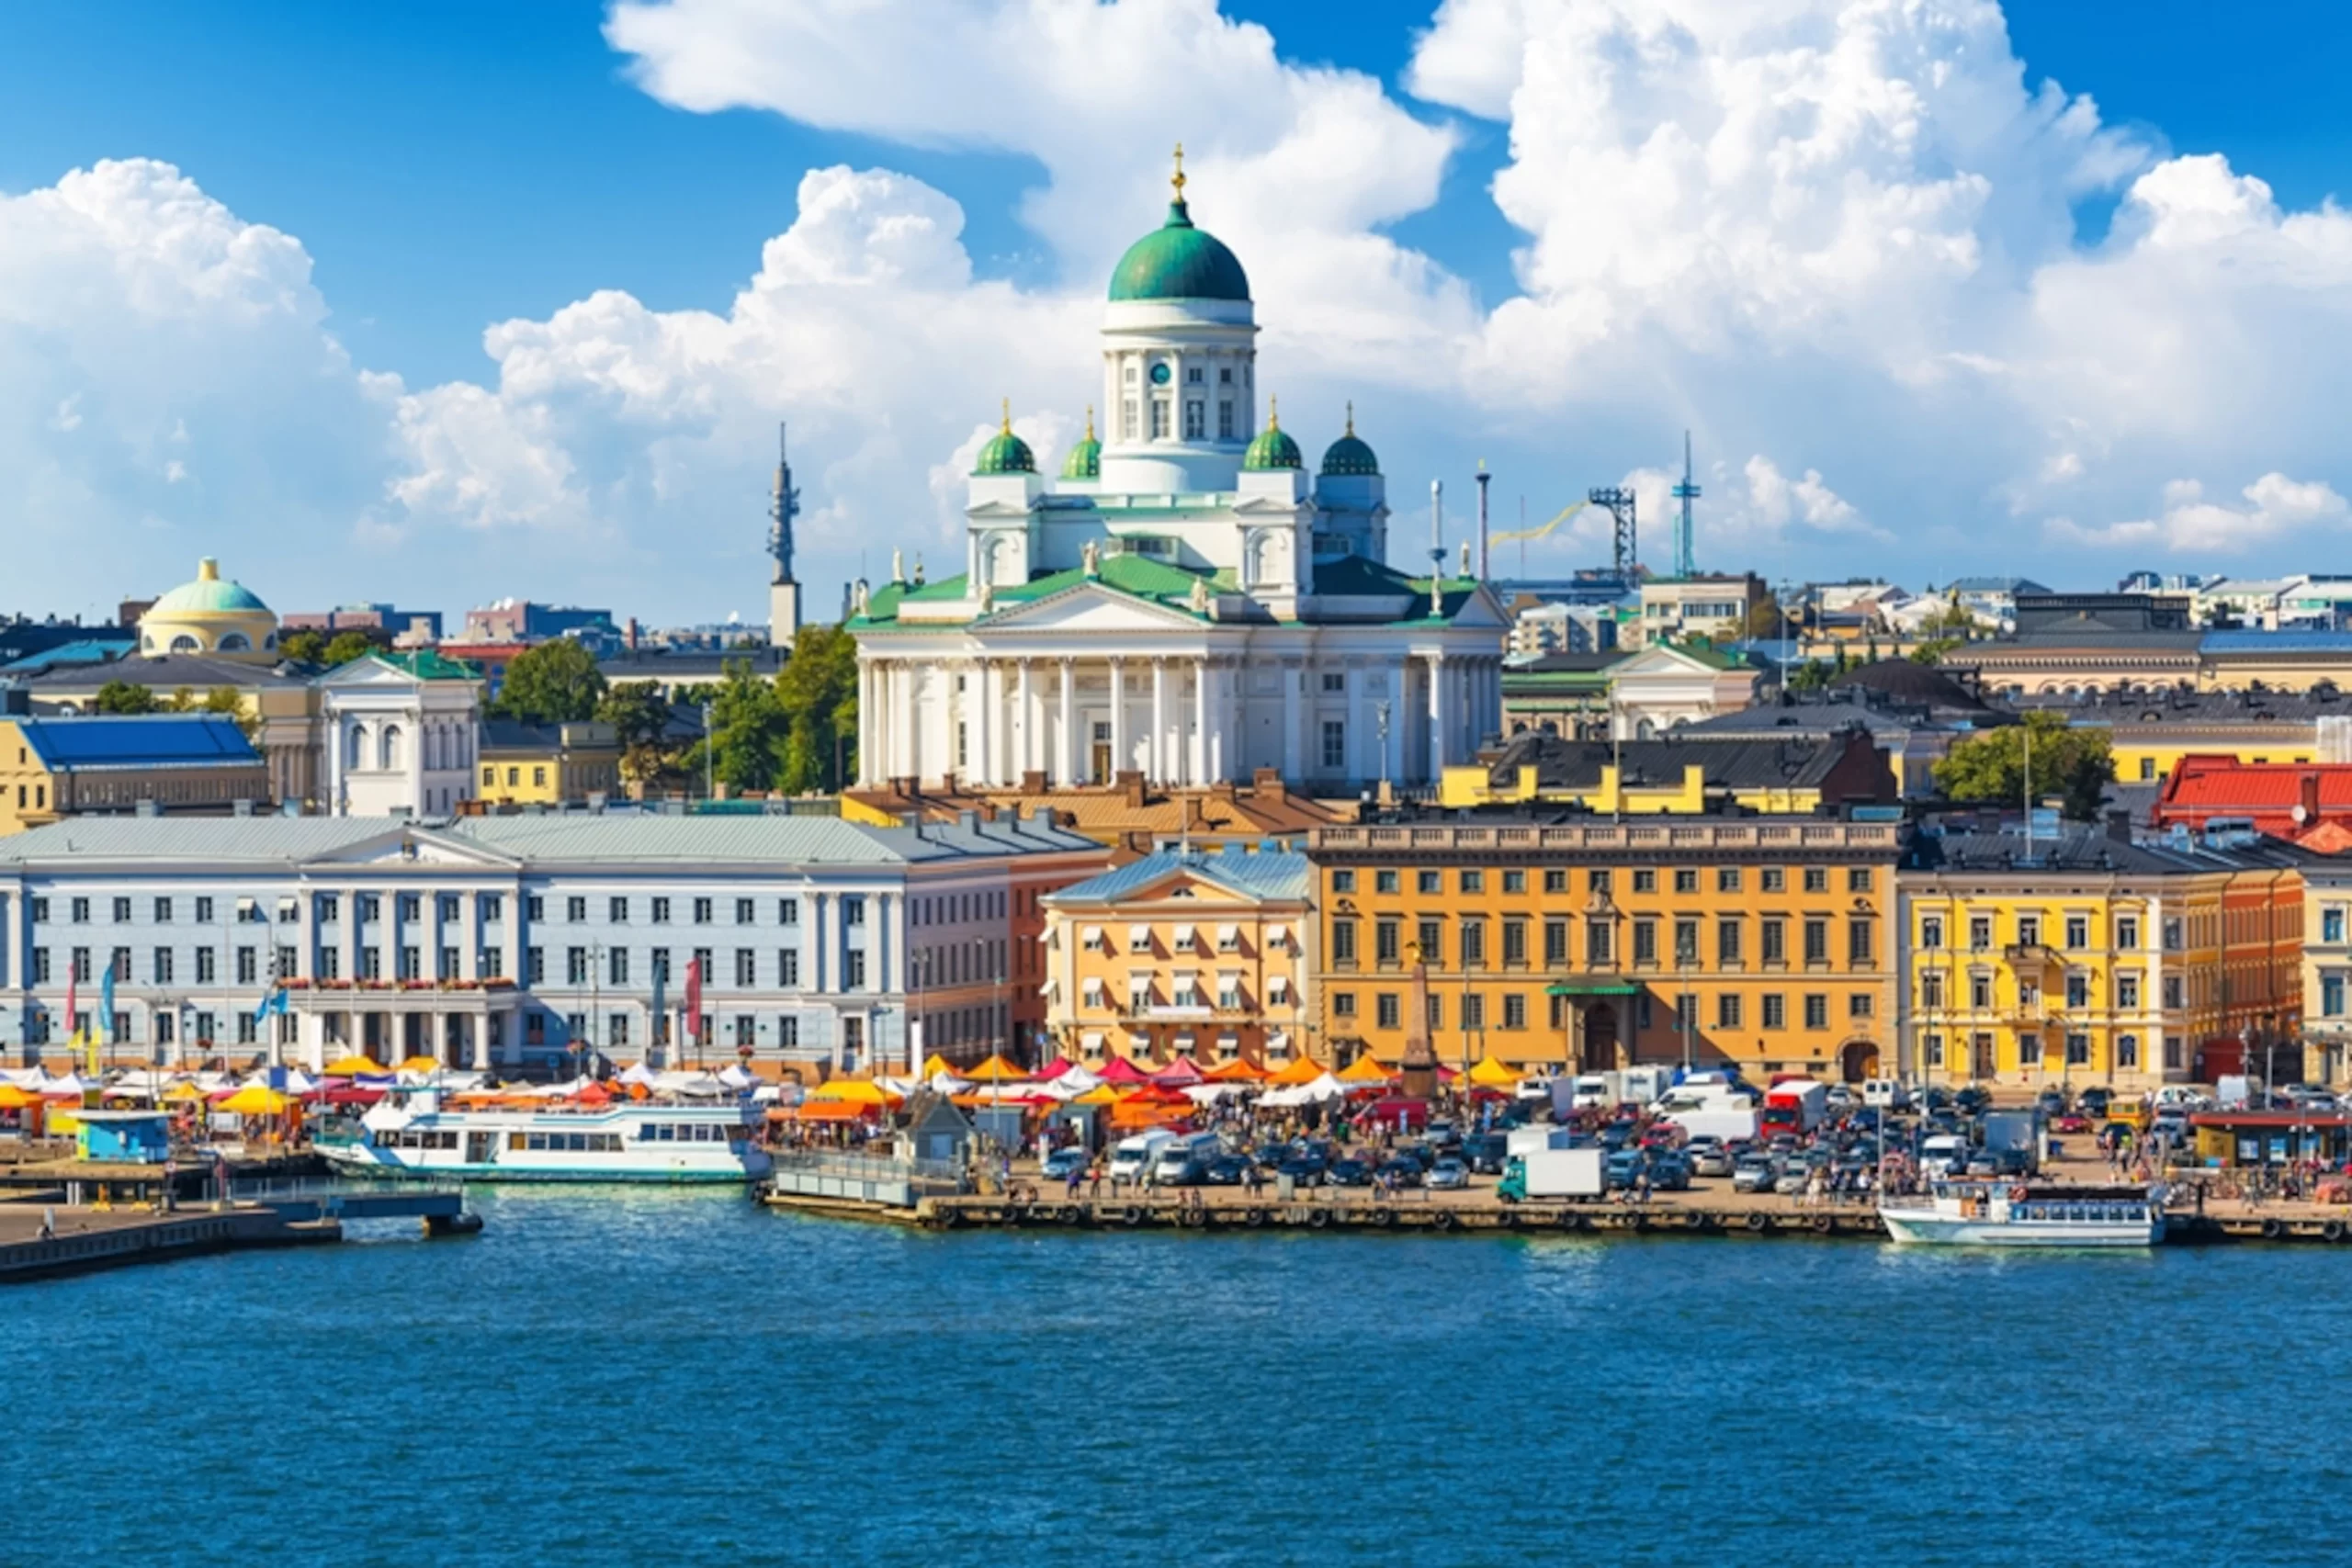 15 Reasons Why Finland Is Ranked The World’s Happiest Country